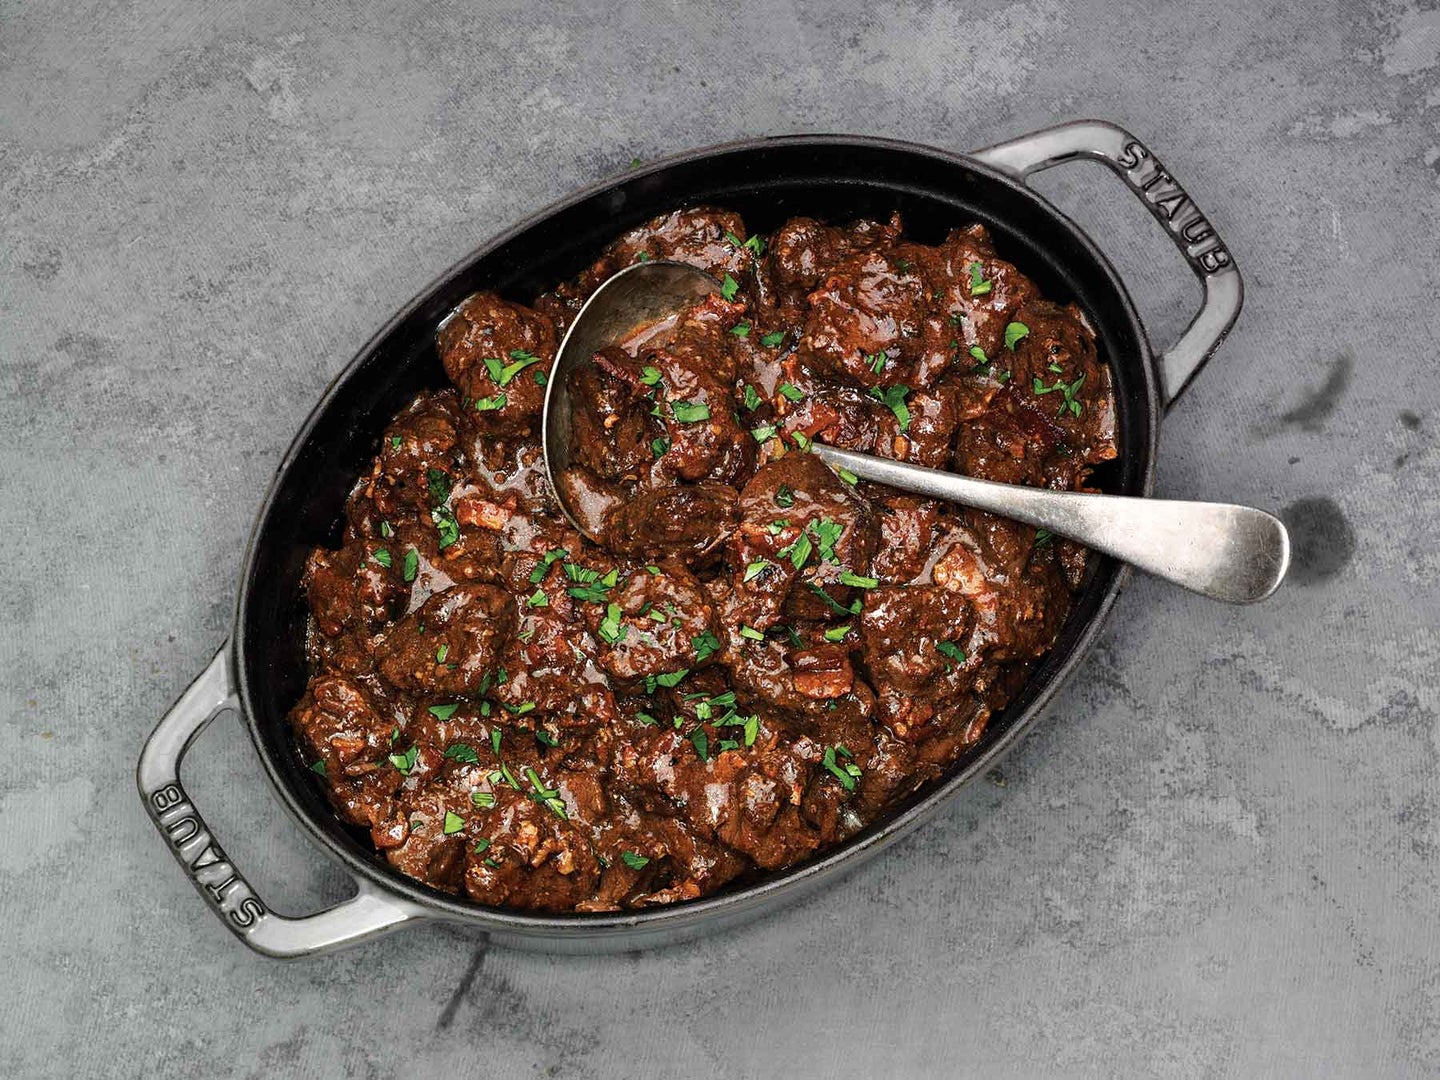 A pot of carbonnade, a venison stew recipe, resting on a granite countertop.